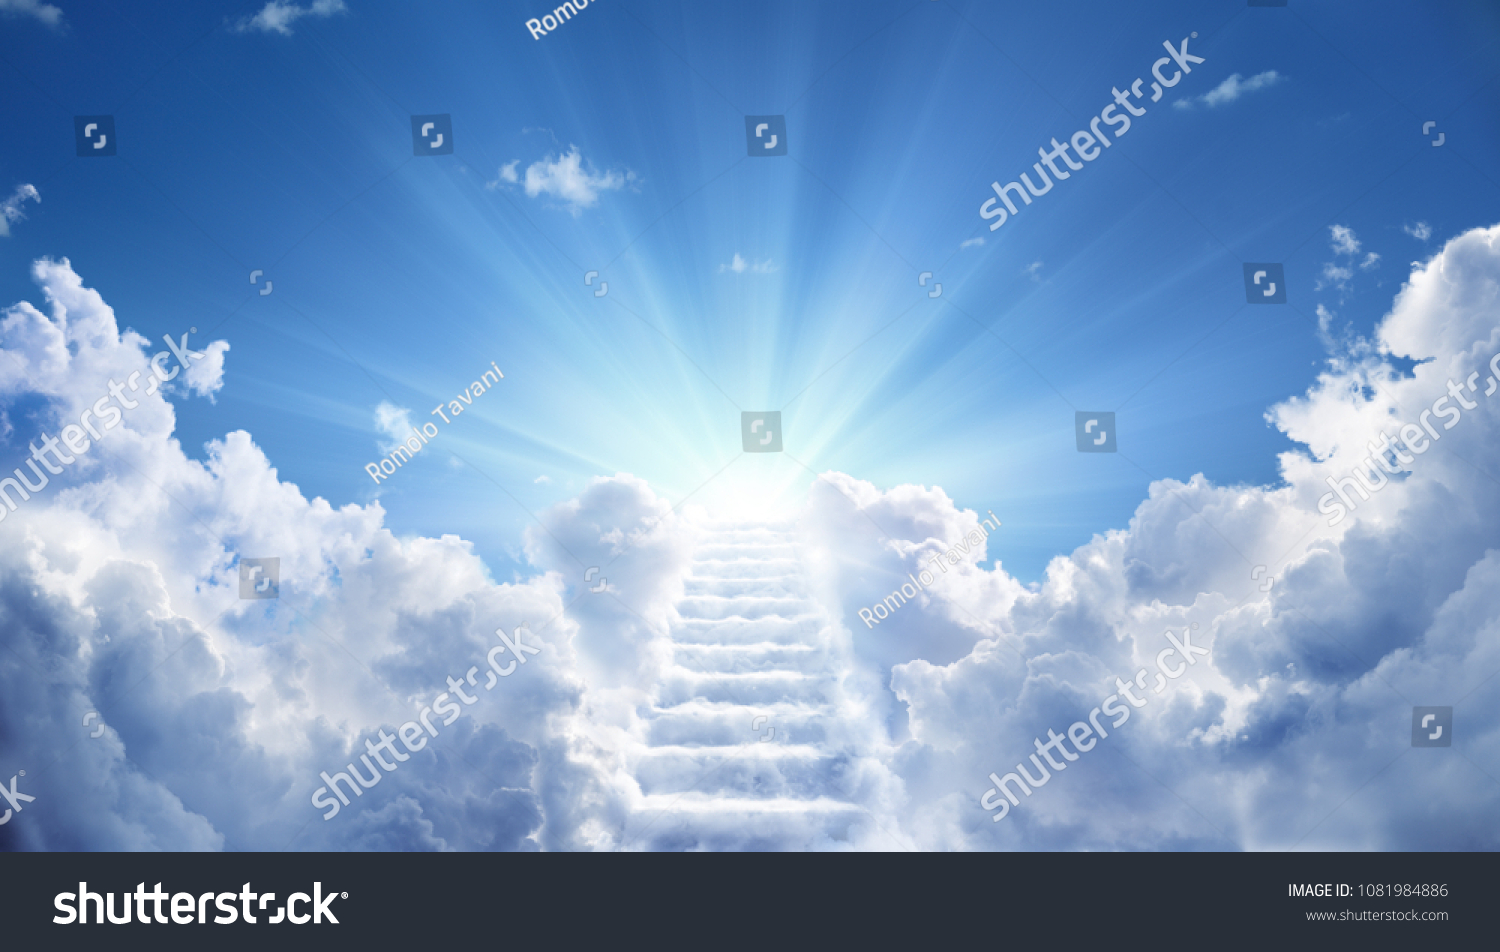 Stairway Leading Up To Heavenly Sky Toward The Light 
 #1081984886